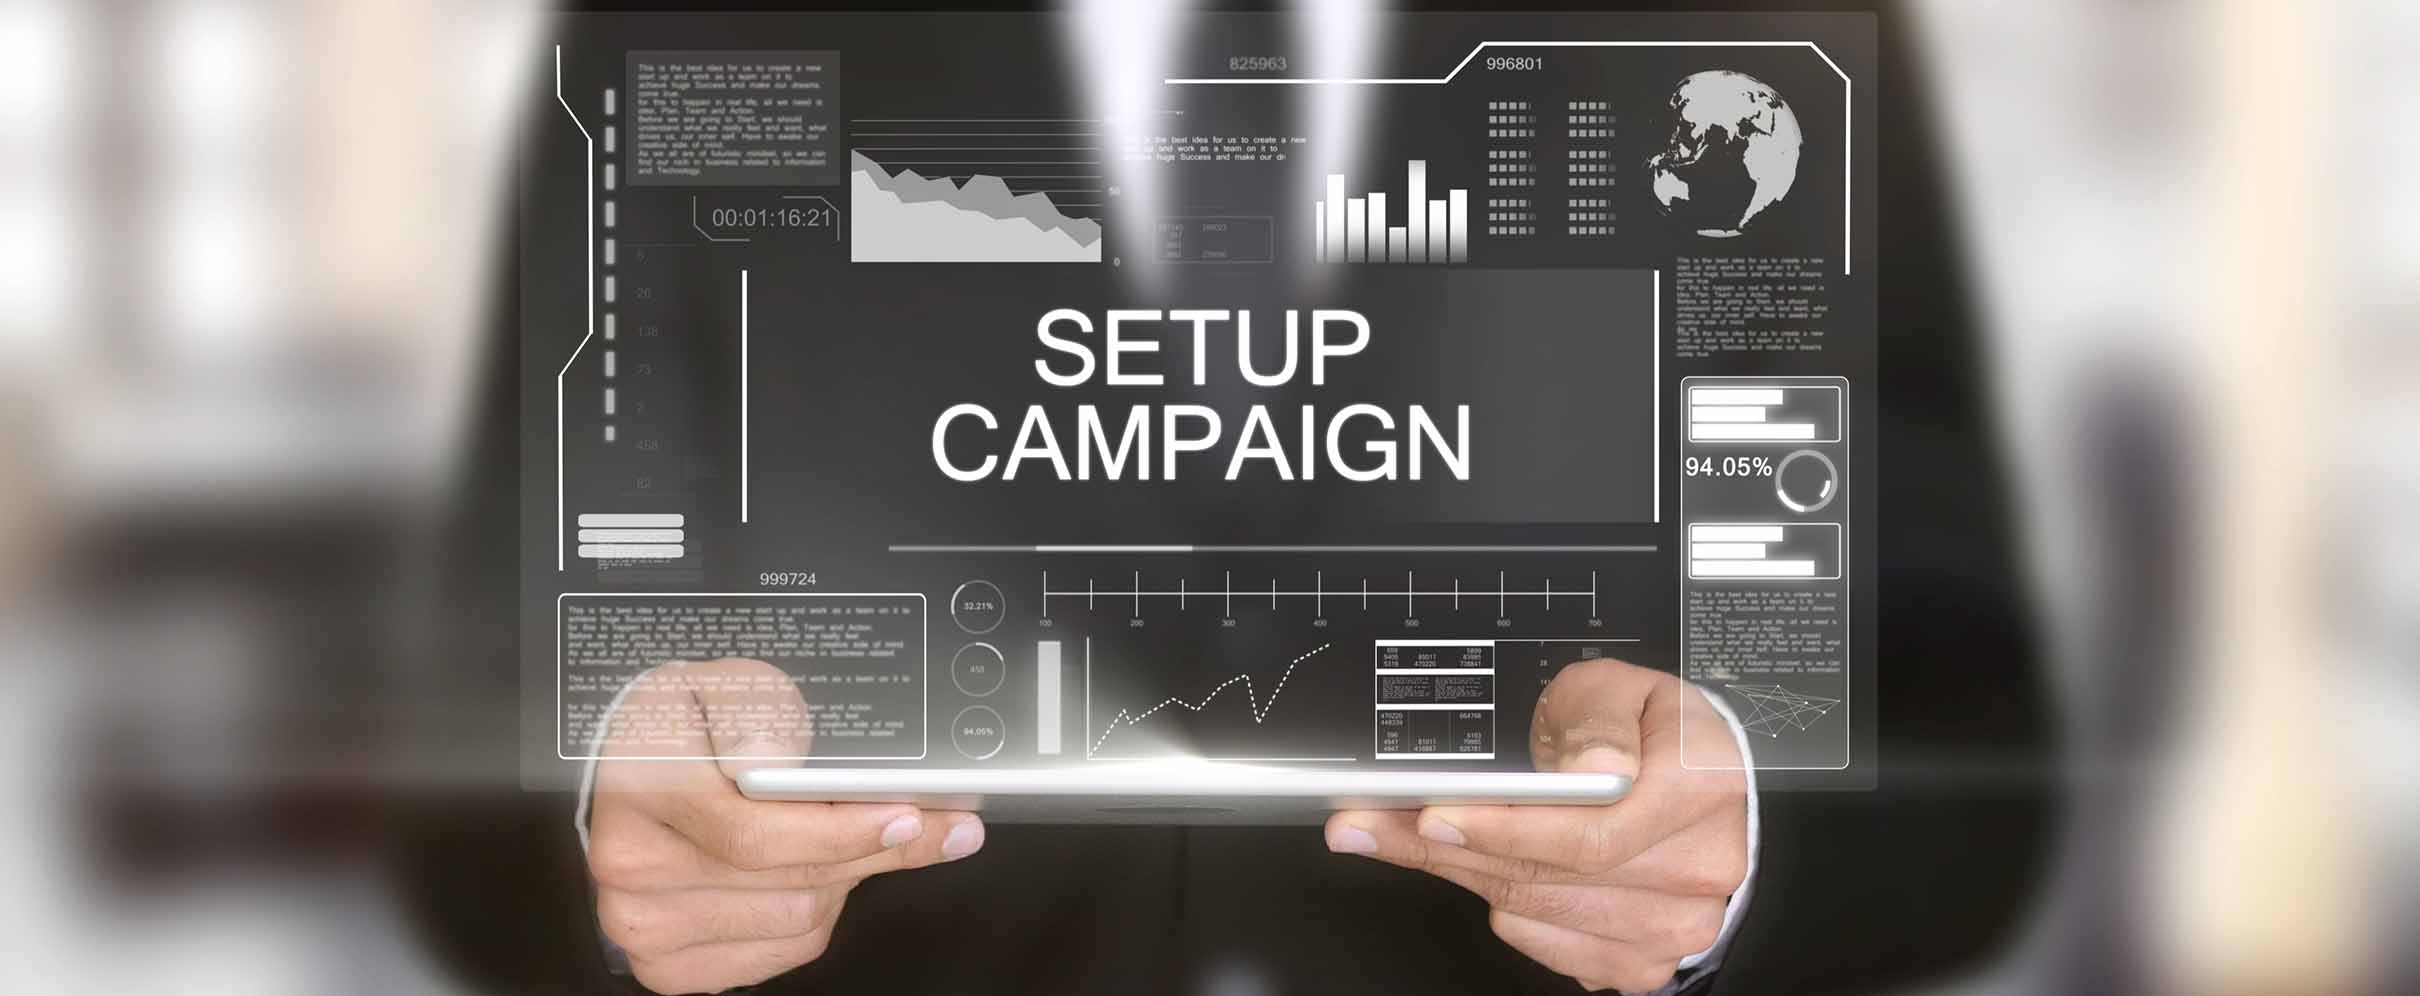 Quickly set up new campaigns with the Business Manager.